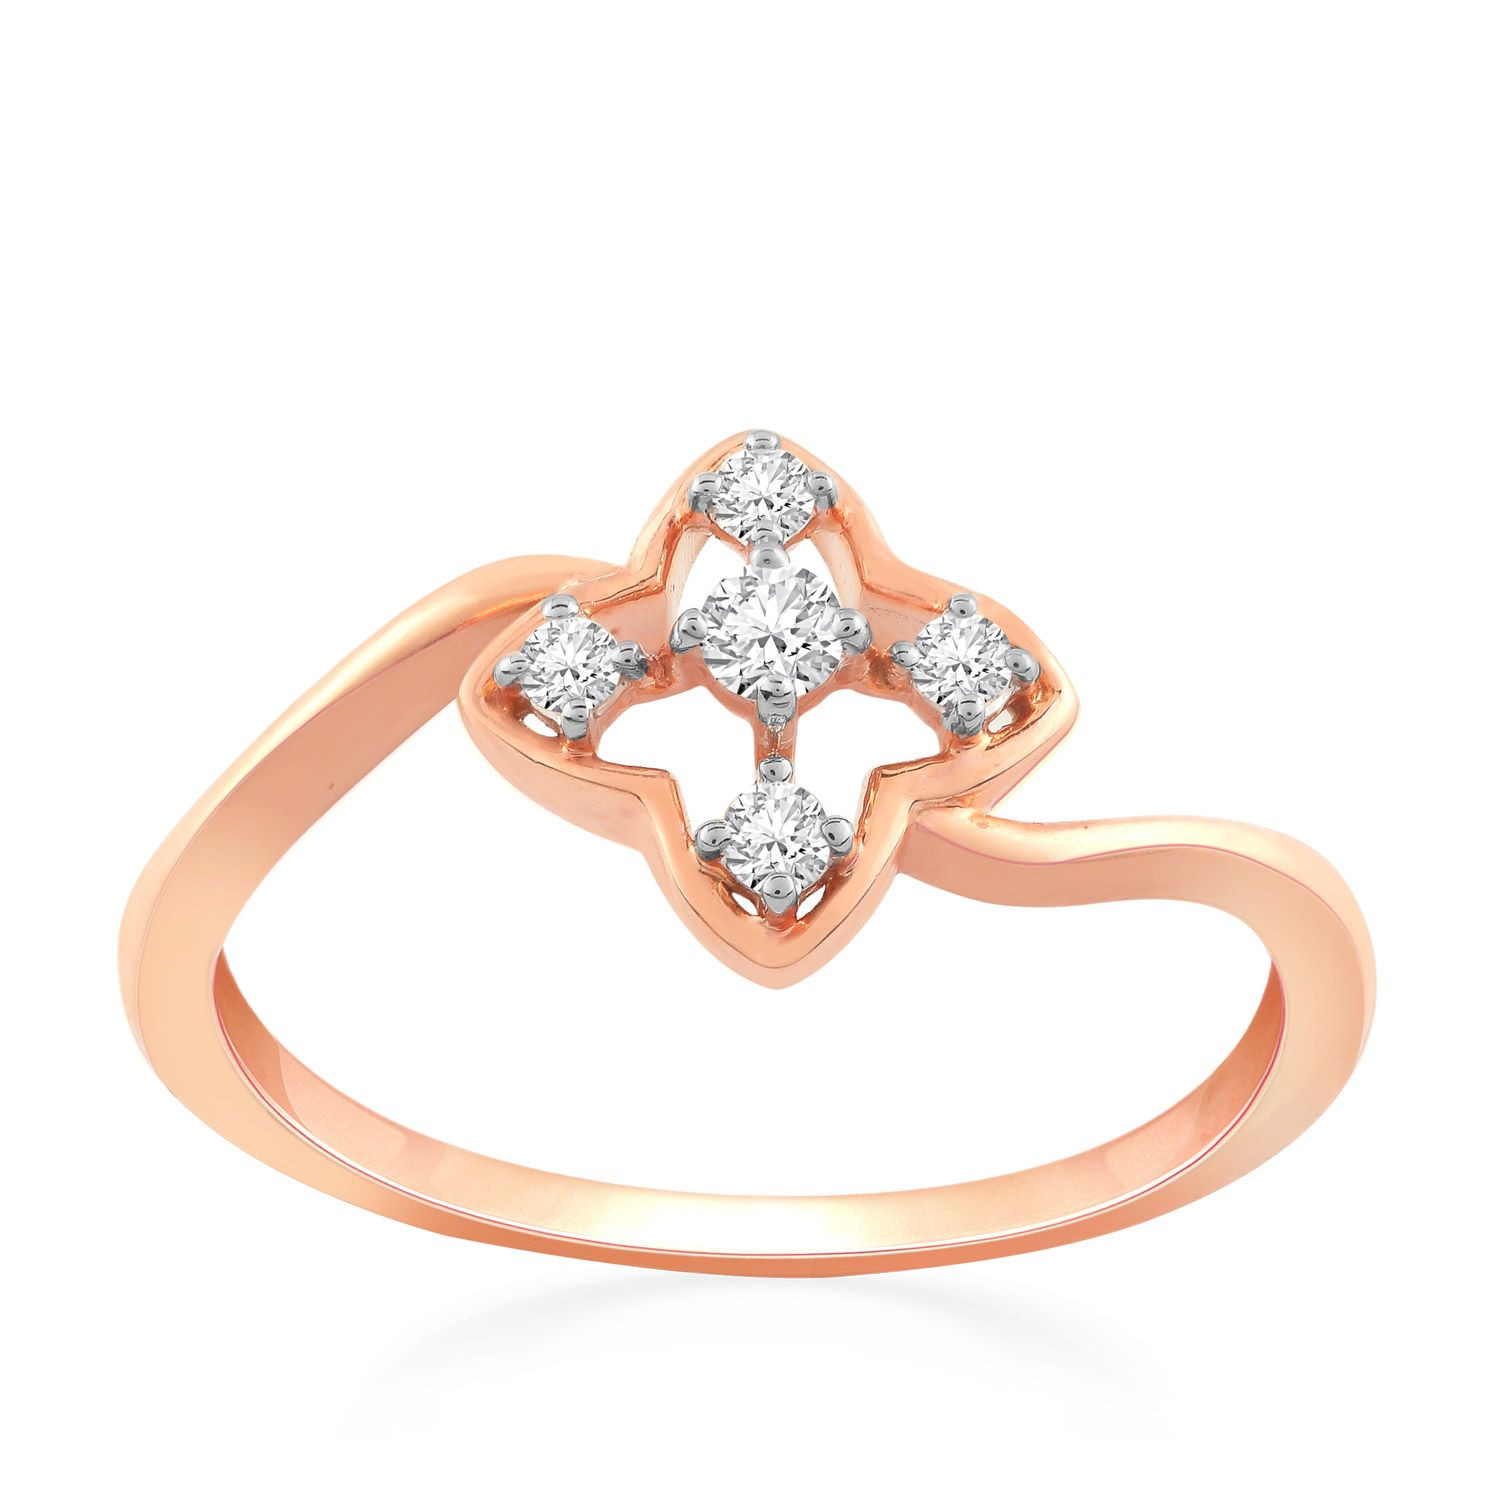 Buy Anjali Lab Grown Diamonds Women's Rings CVD Daimonds With 14kt Rose Gold  AILR-056 at Amazon.in